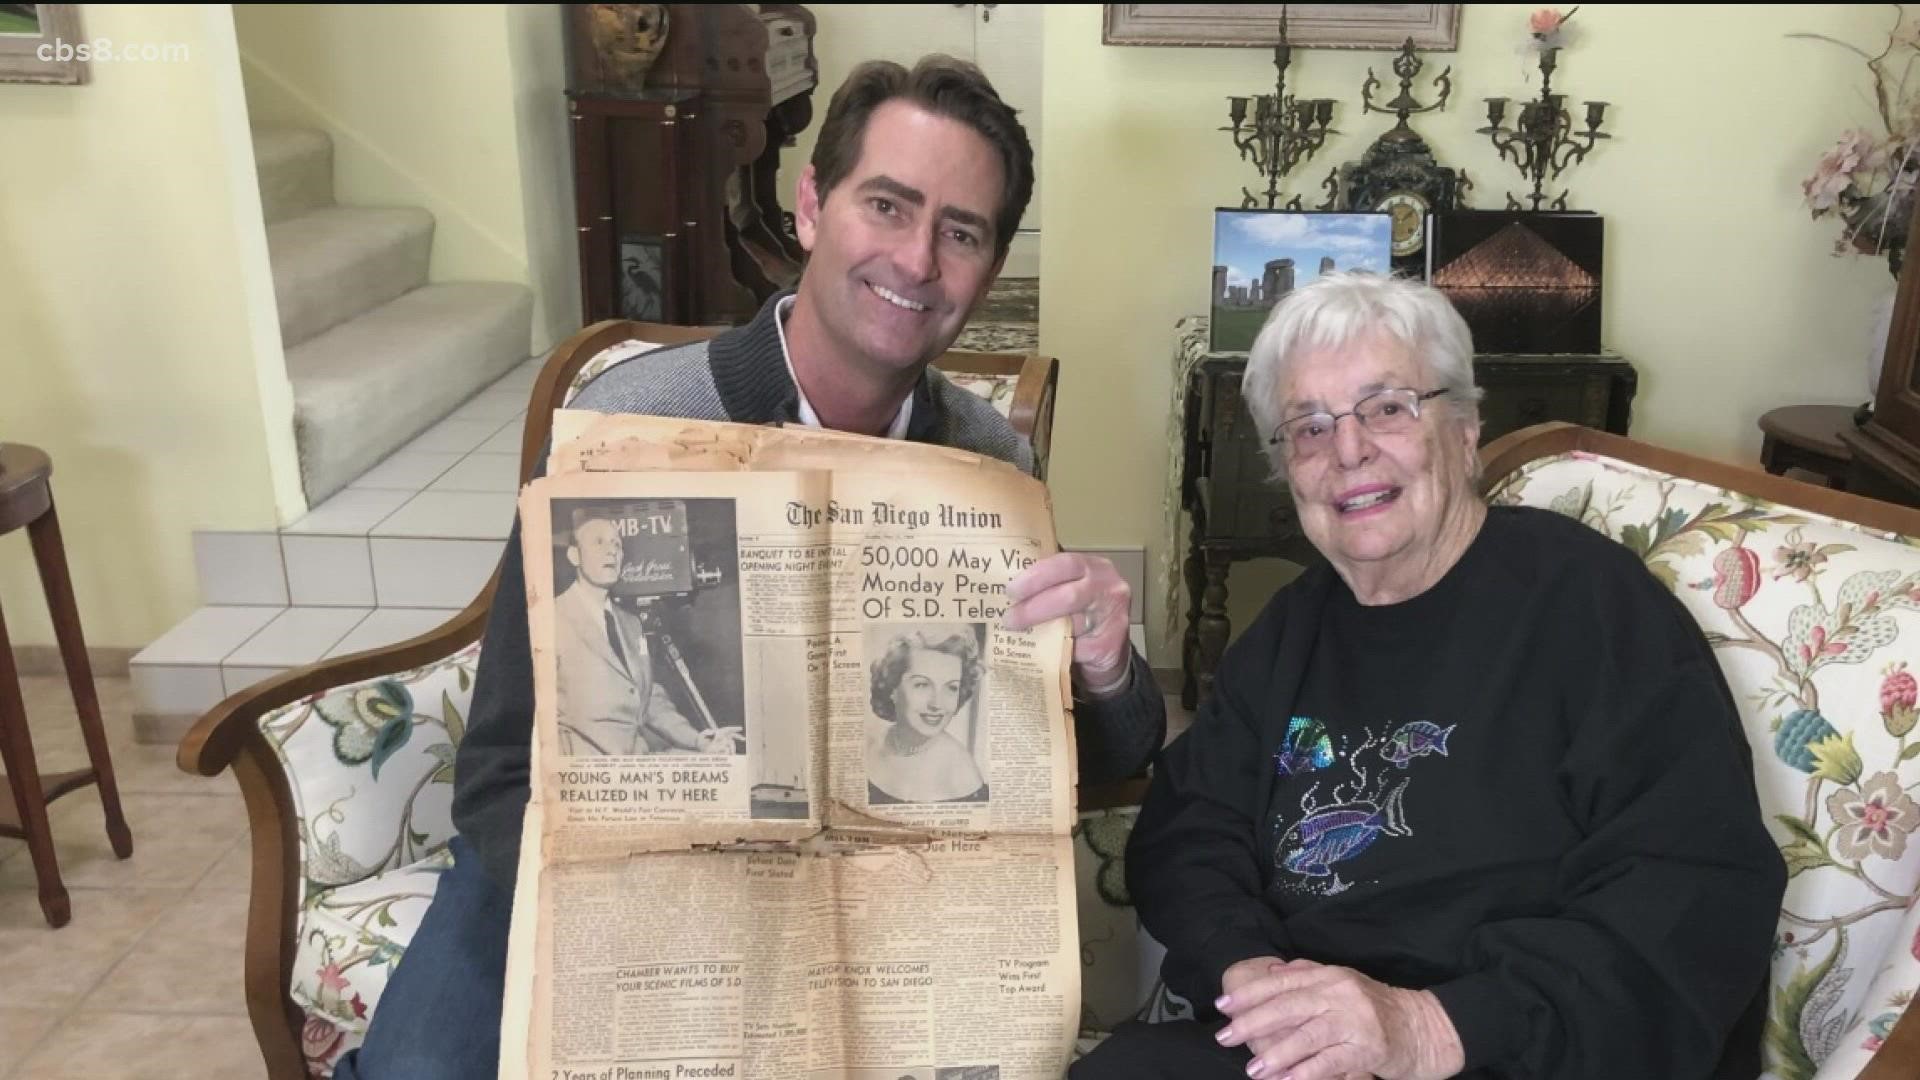 Sheila Donigan started watching KFMB TV in 1949 and still tunes in every day to the San Diego station.